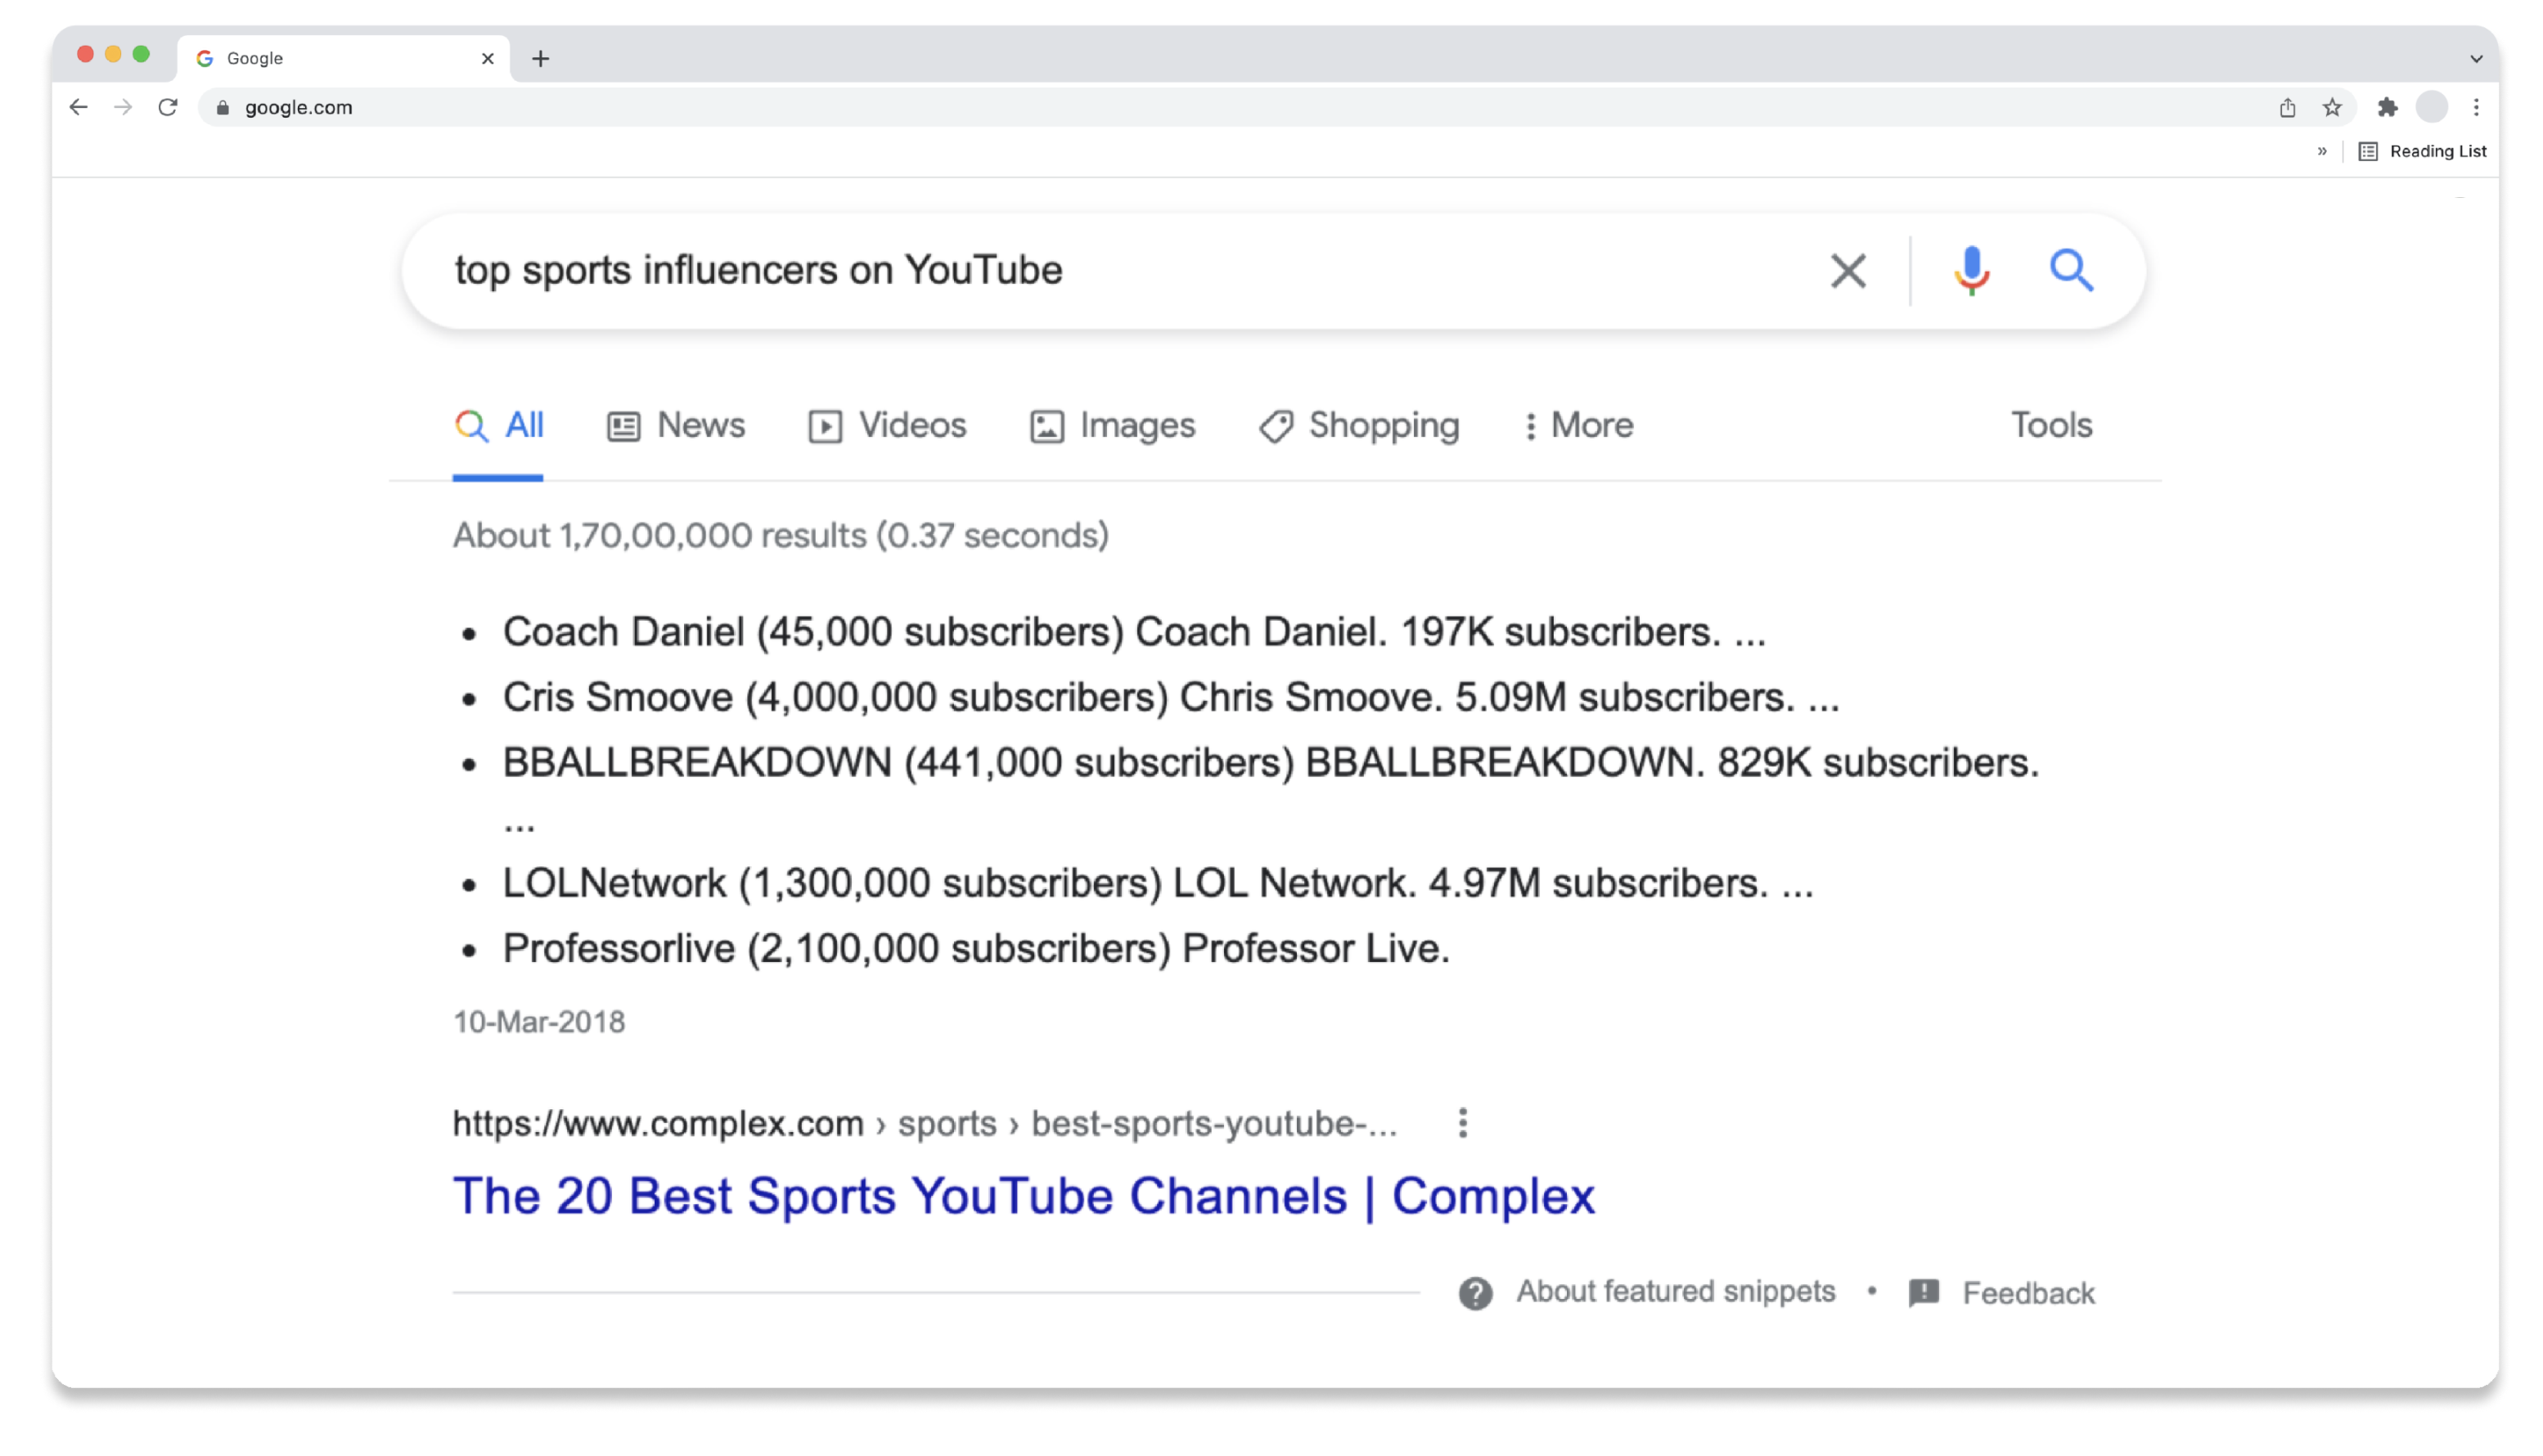 A screenshot of a Google search engine results page showing the results for -top sports influencers on YouTube-.